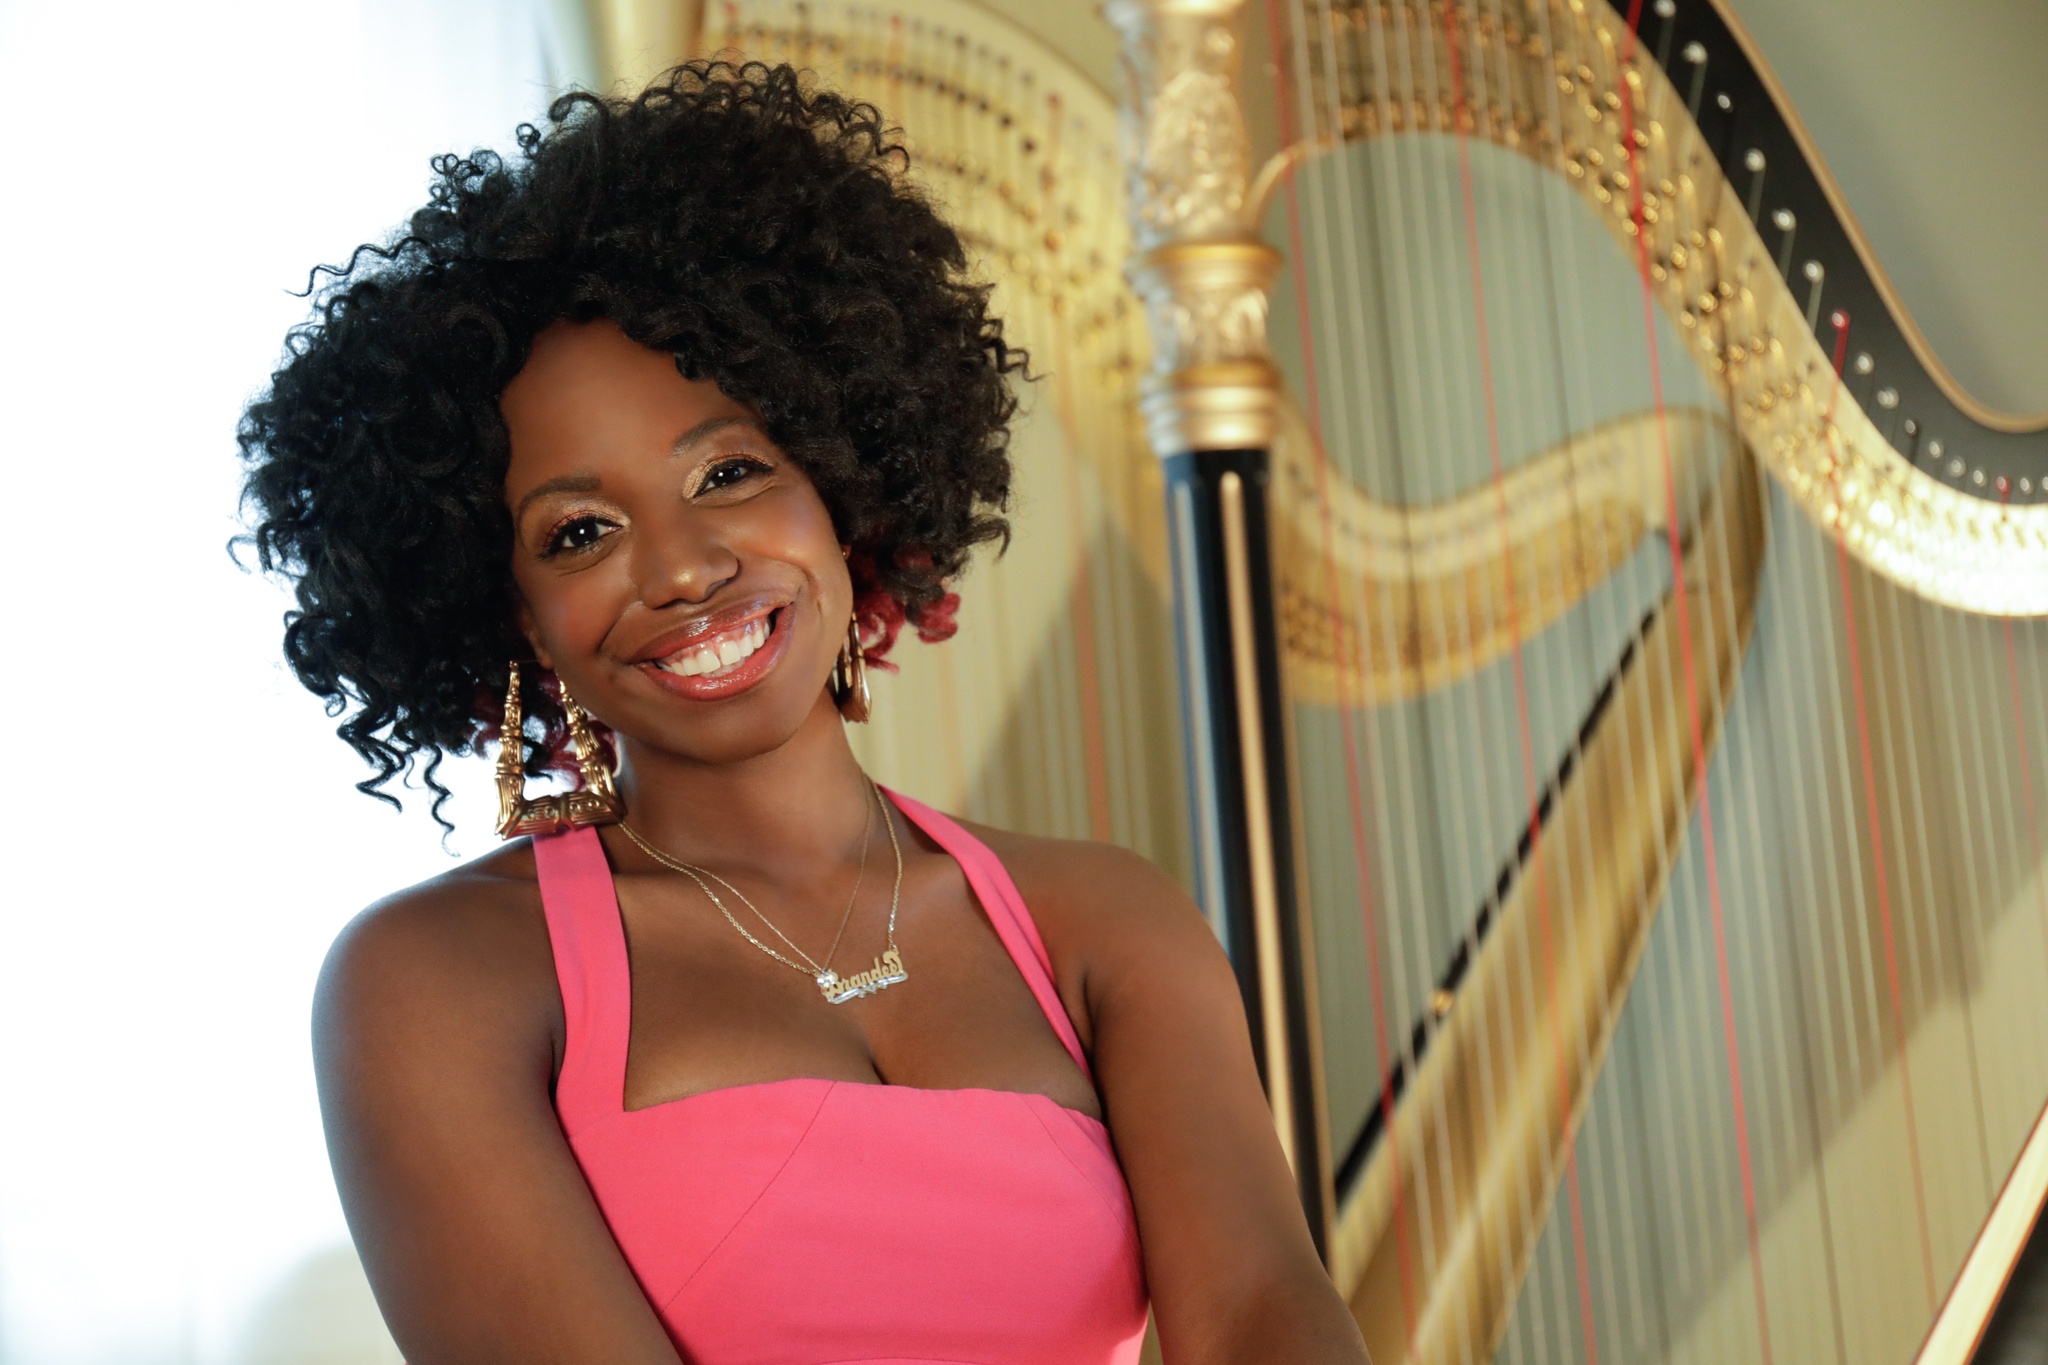 A Black woman in a pink dress with shoulder straps stands with two gilded harps behind her.